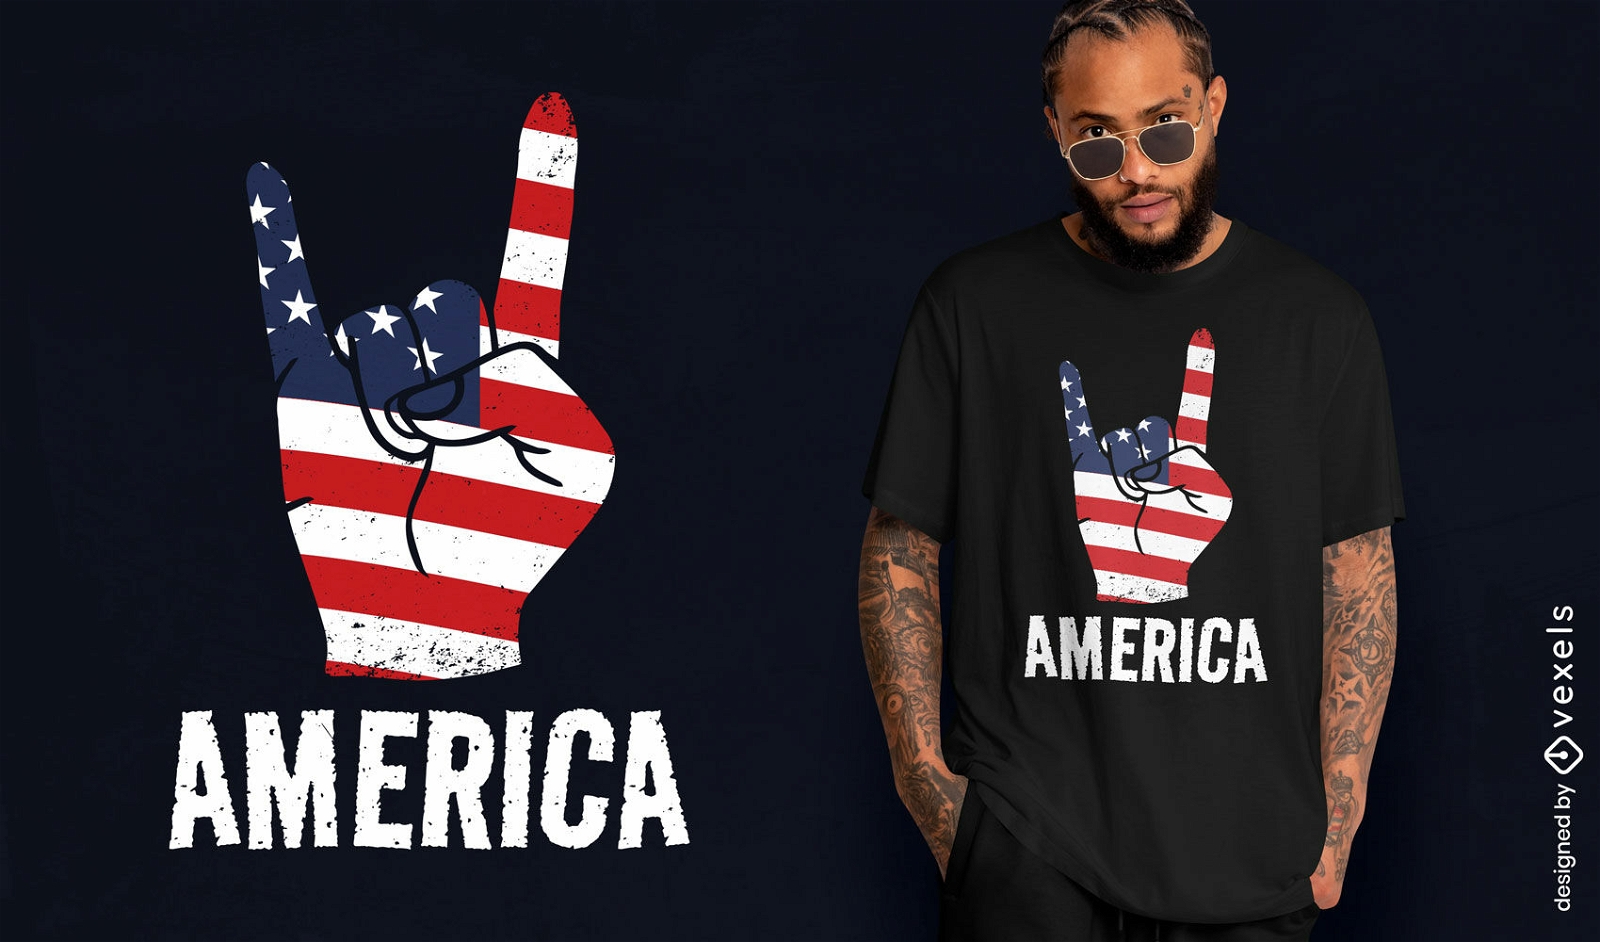 America rock and roll t-shirt design